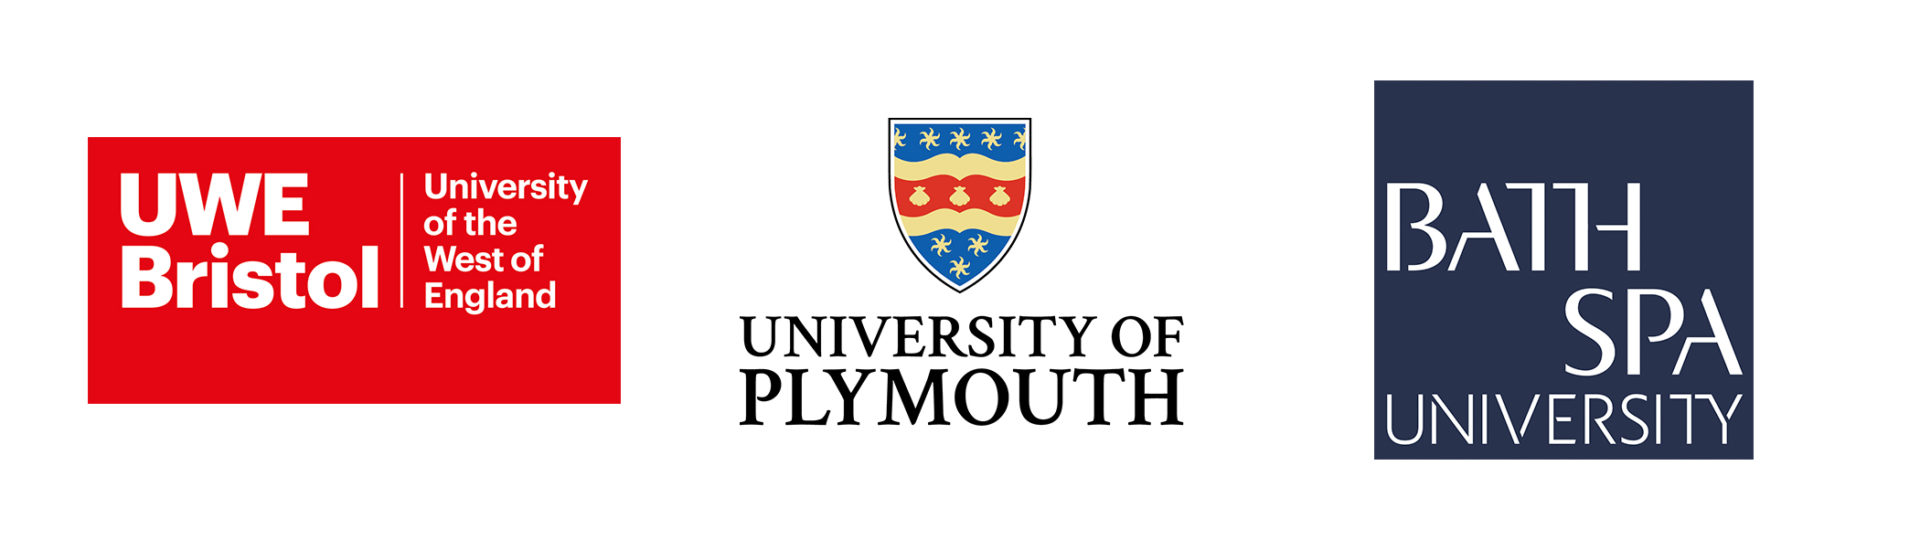 University of the West of England, University of Plymouth and Bath Spa University logos